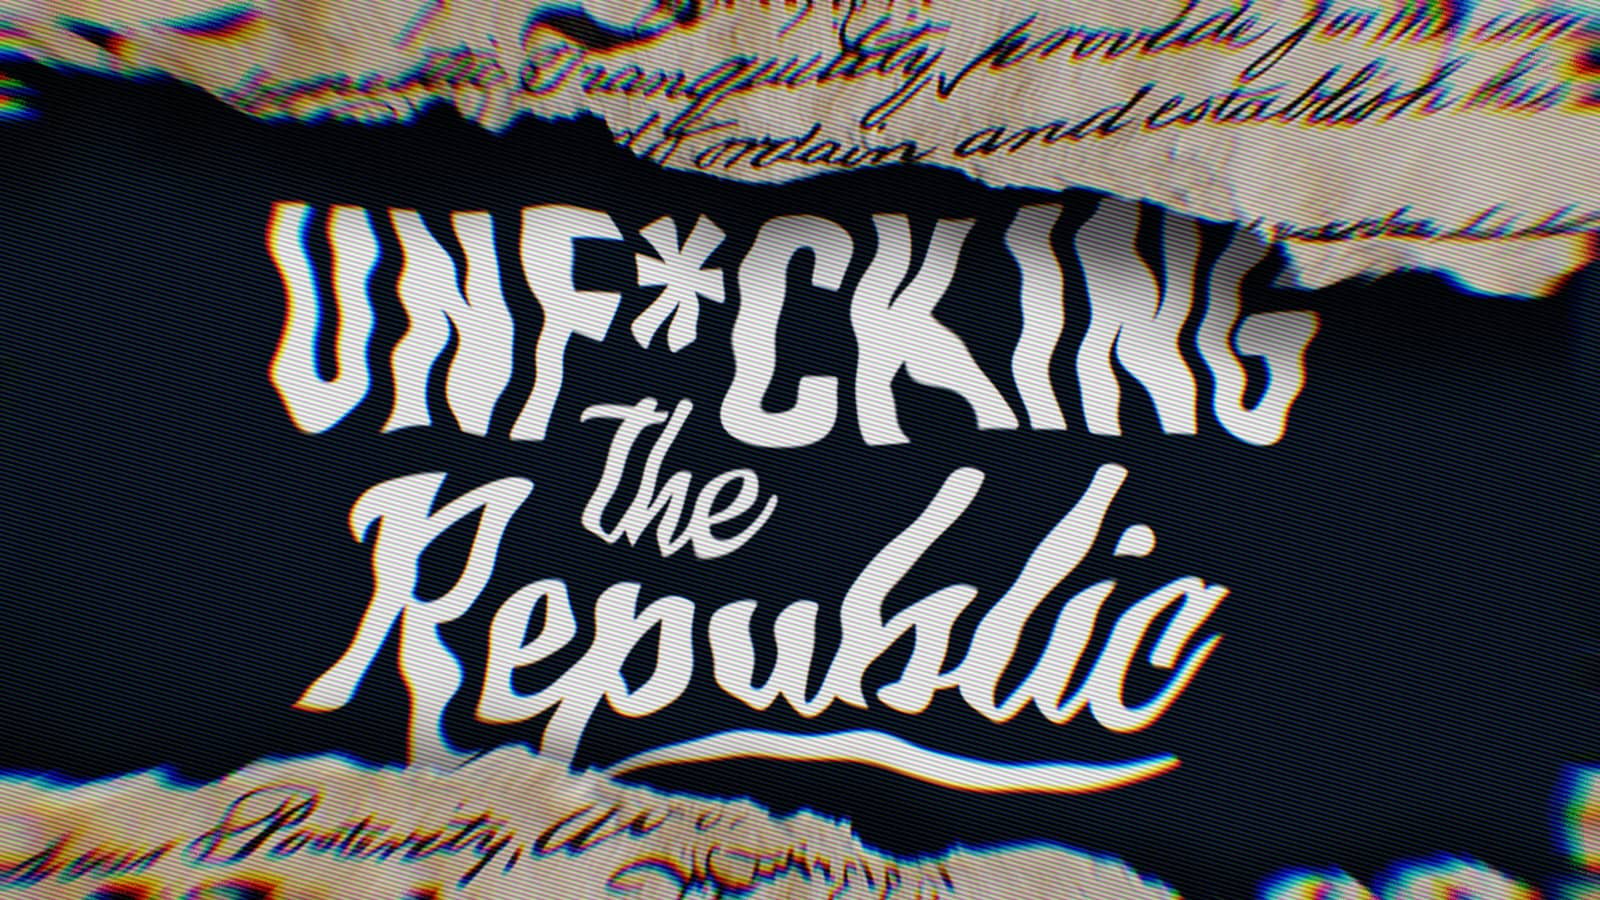 The logo of Unf*cking the Republic.